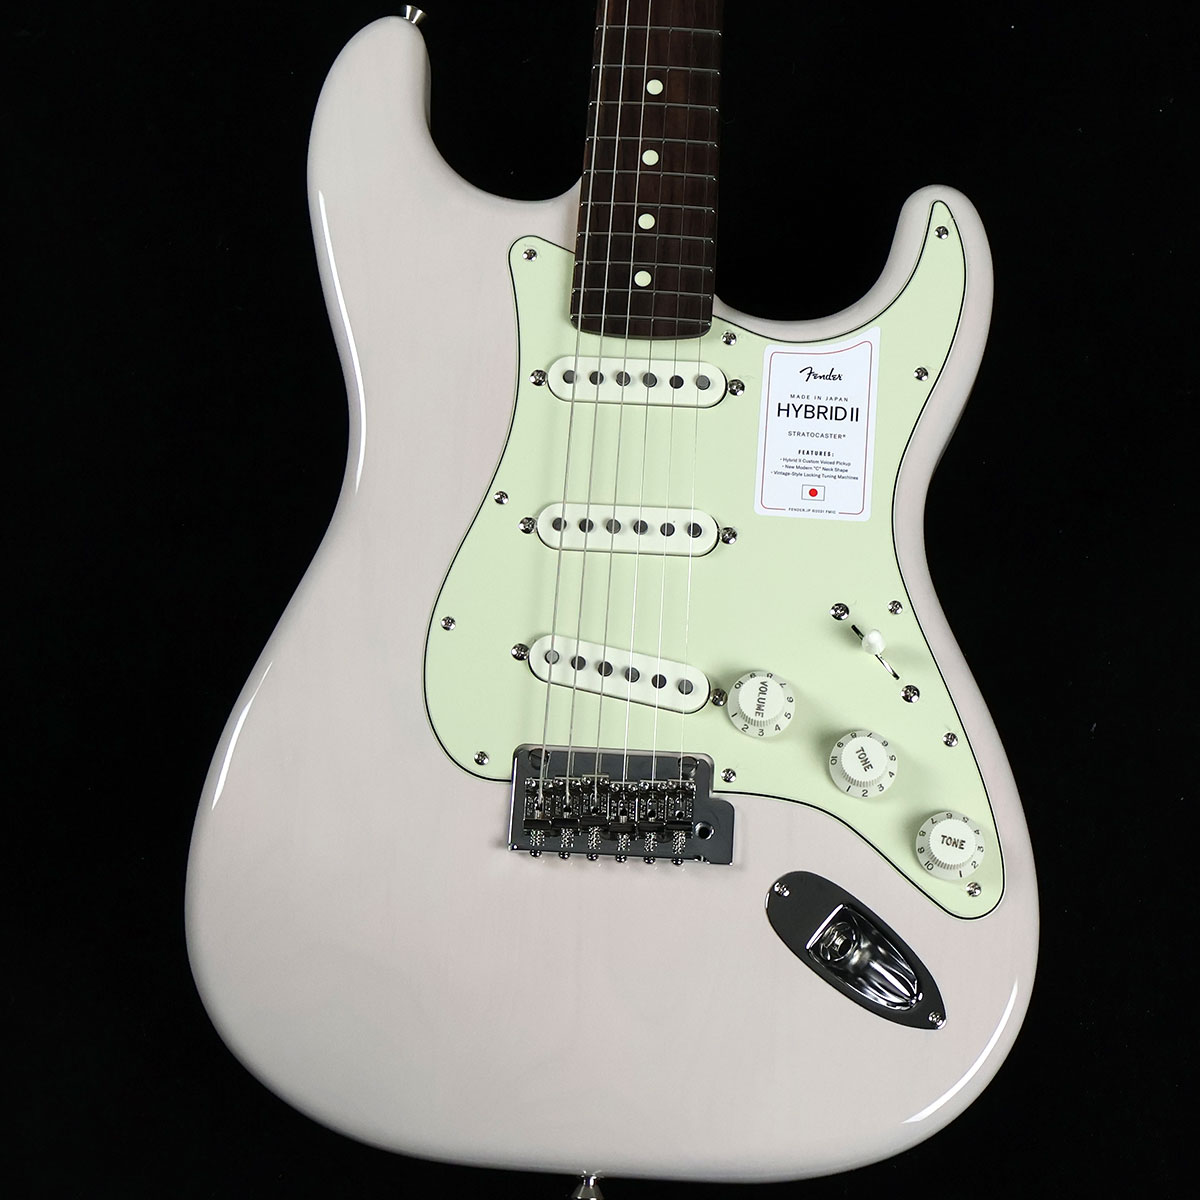 Fender Made in JAPAN Hybrid II Stratocaster US Blonde エレキギター 【未展示品・専任担当者による調整済み】【ミ・ナーラ奈良店】